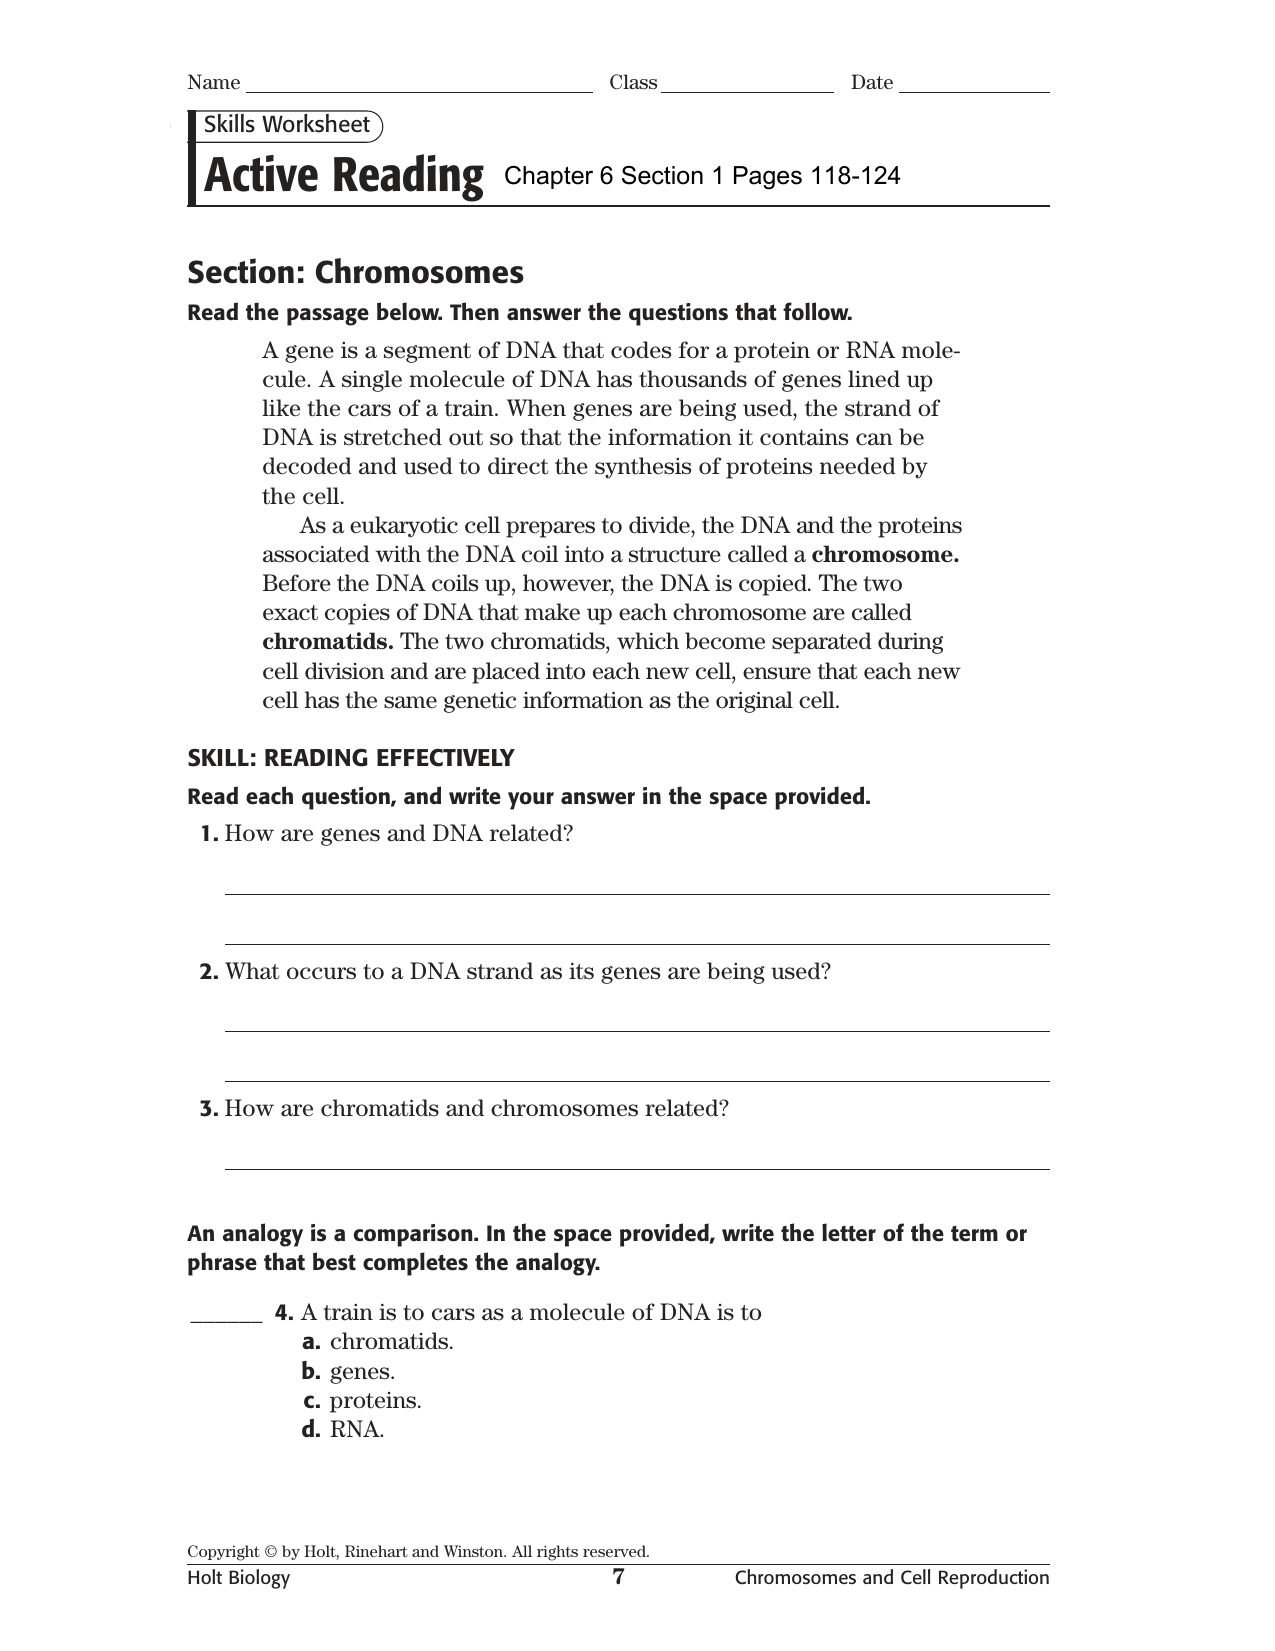 Ch. 22 Section 22 Active Reading/Quiz In Skills Worksheet Active Reading